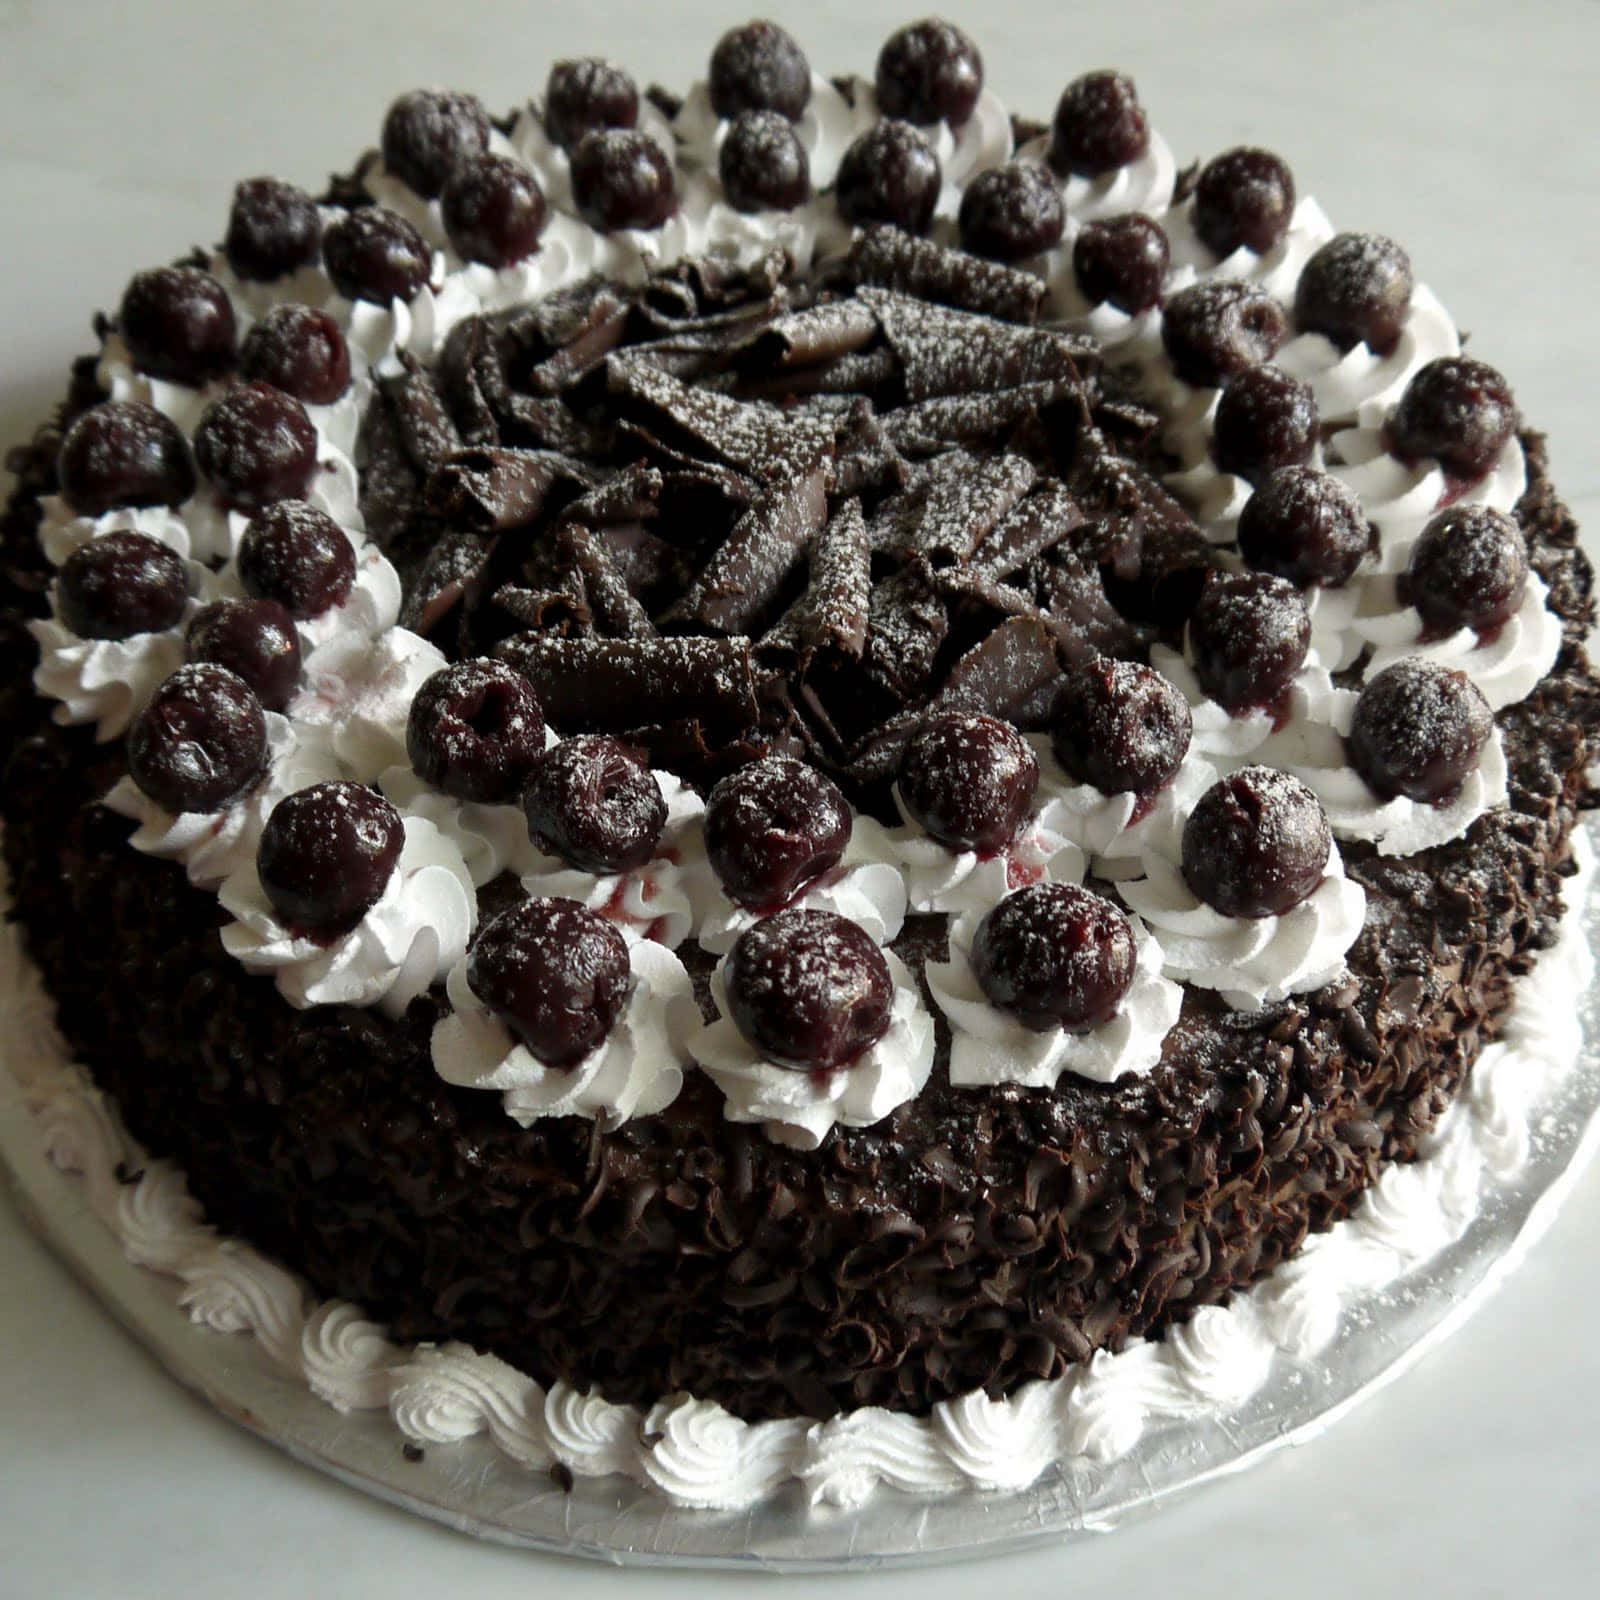 Enjoy the deliciousness of Black Forest Cake Wallpaper